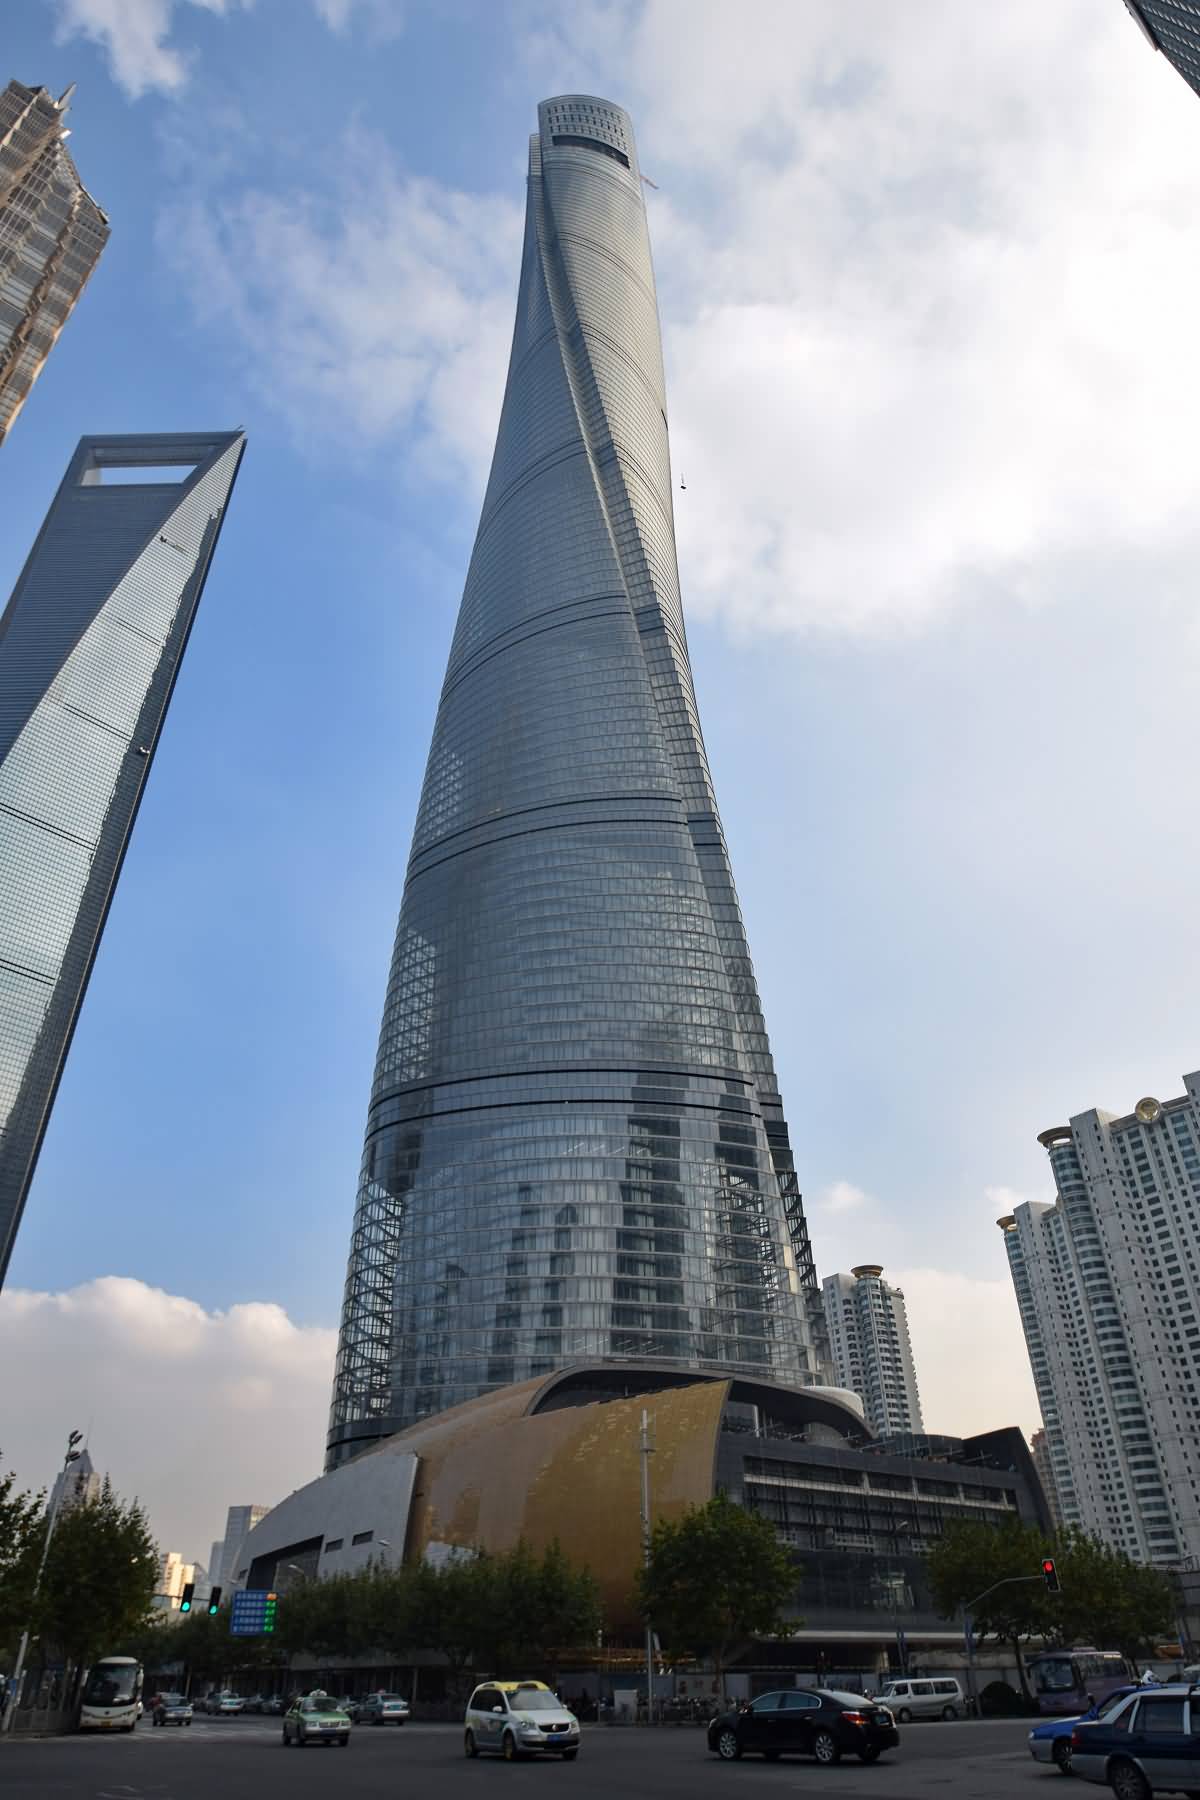 Adorable View Of The Shanghai Tower